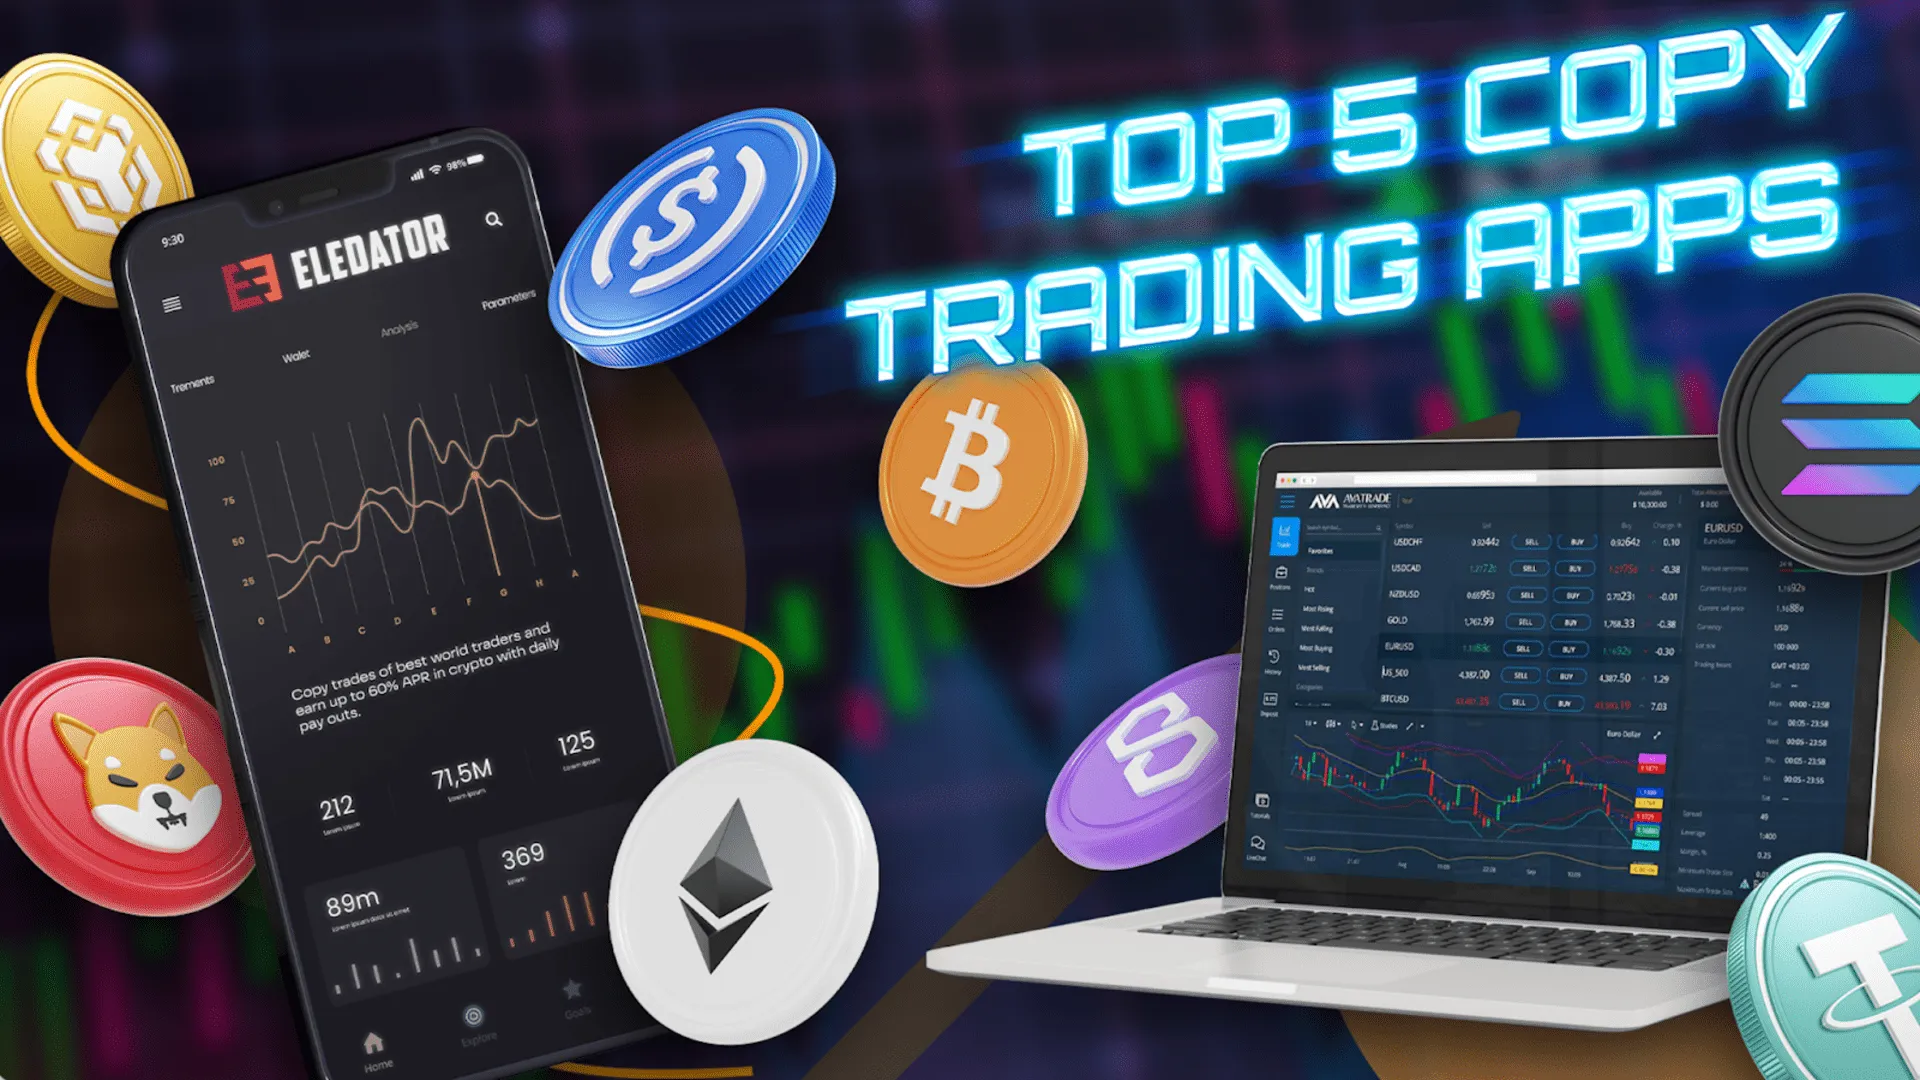 Top 5 Copy Trading Platforms Crypto Enthusiasts Should Know About